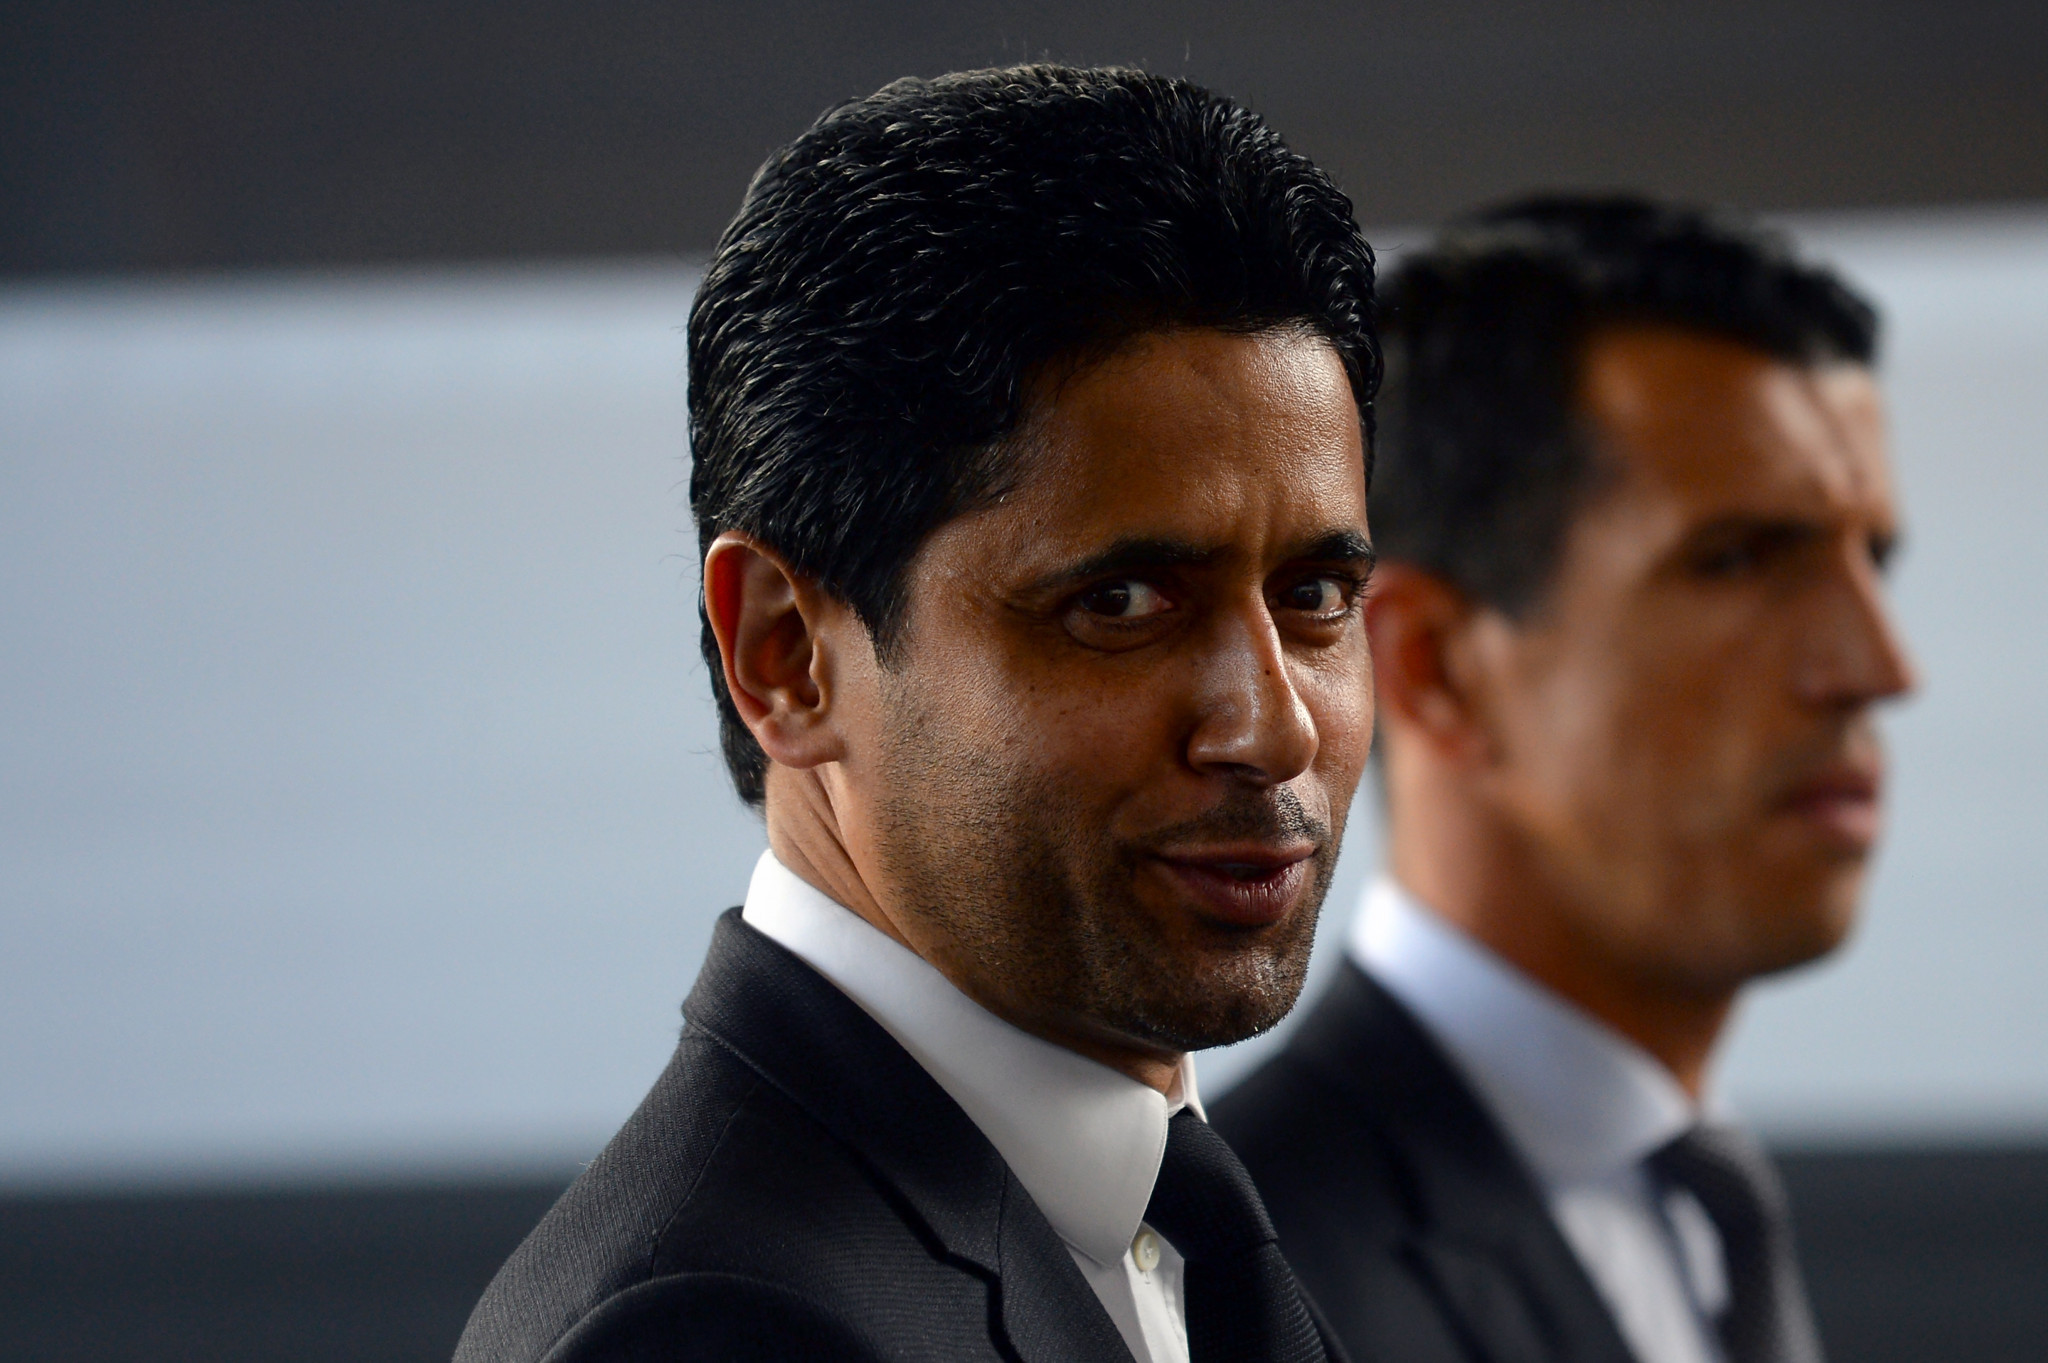 Charges against Paris Saint-Germain President Nasser Al-Khelaifi and former FIFA secretary general Jérôme Valcke were announced today by the Office of the Attorney General of Switzerland ©Getty Images